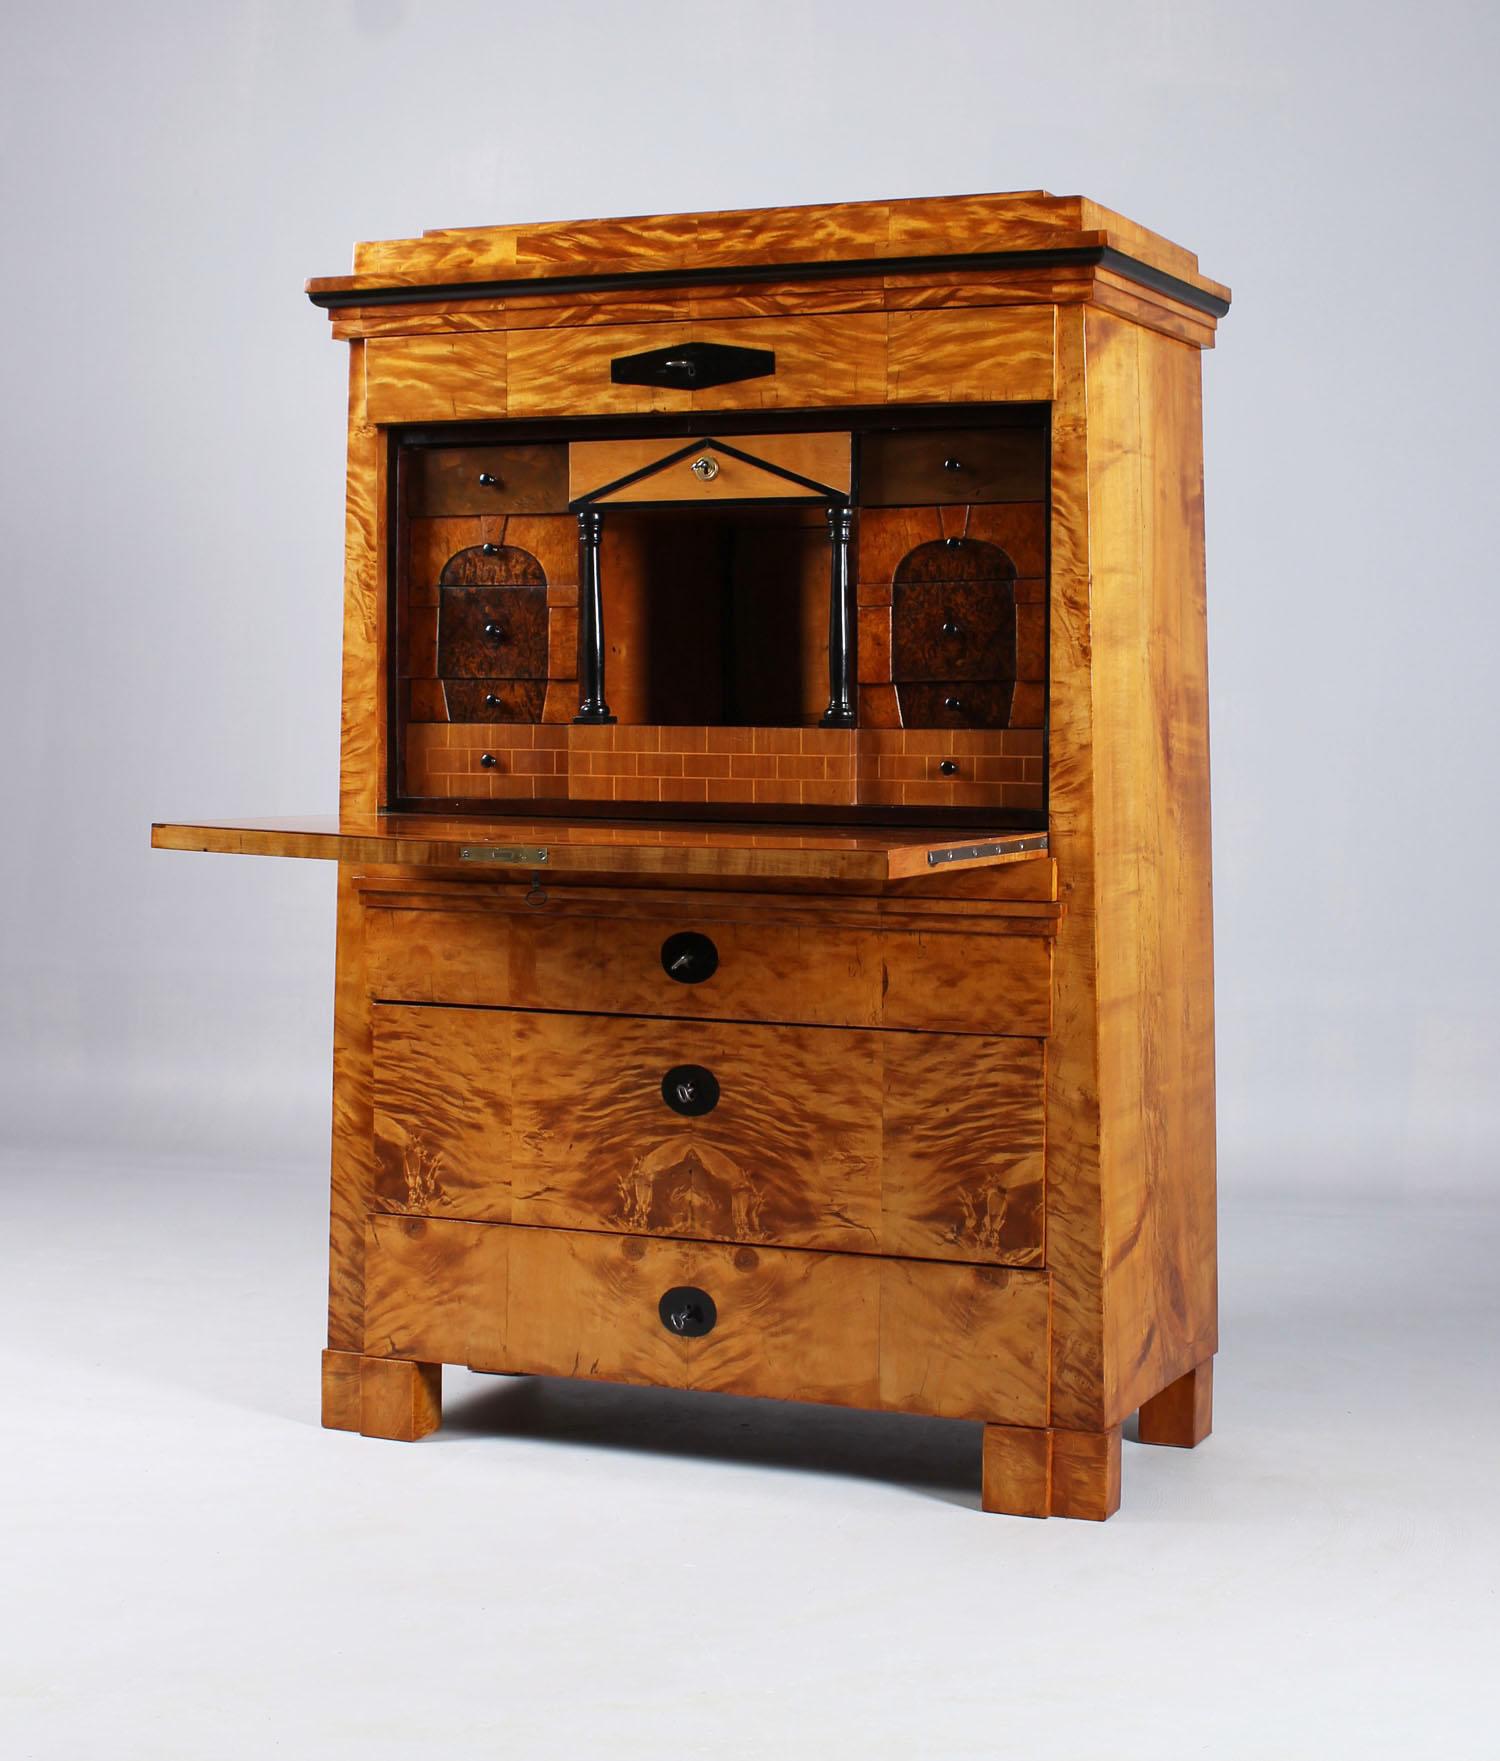 Conical secretary

North-East Germany
birch,
19th century, Biedermeier, circa 1820

Dimensions: H x W x D 150 x 102 (94) x 52 cm

Description:
Rare conically tapering secretary with strongly flamed birch veneer.

The lowest drawer is